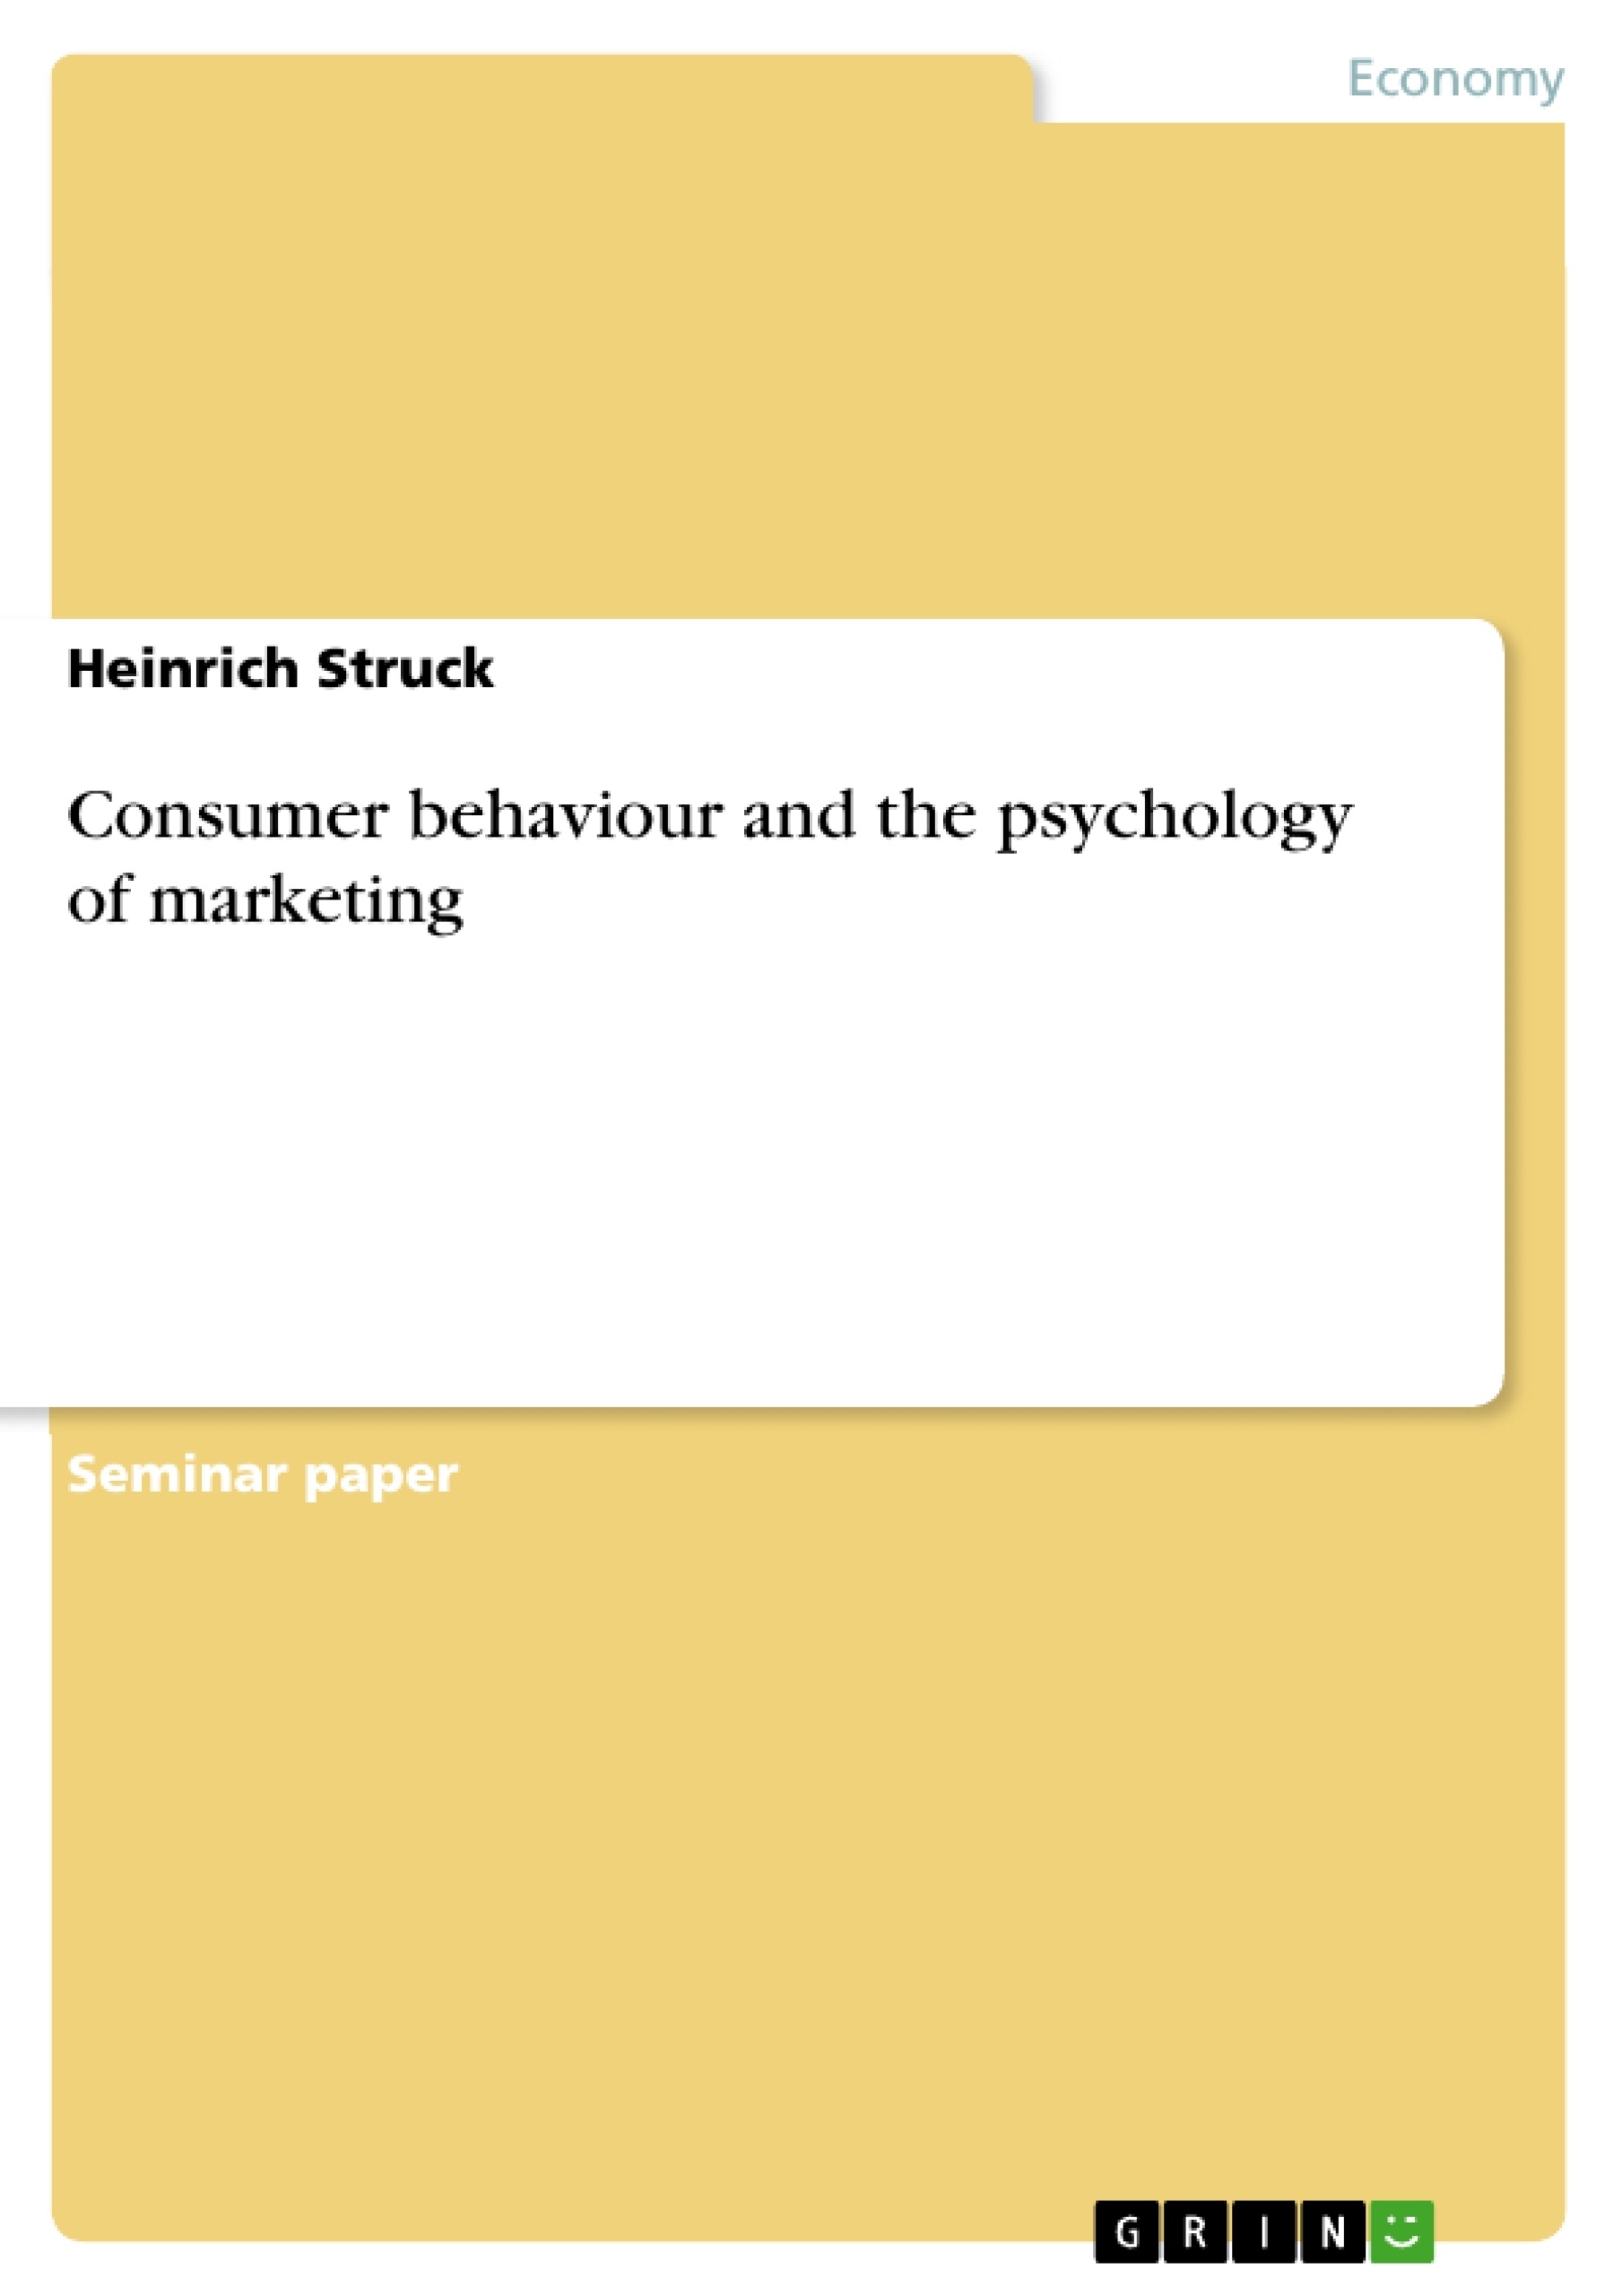 Title: Consumer behaviour and the psychology of marketing